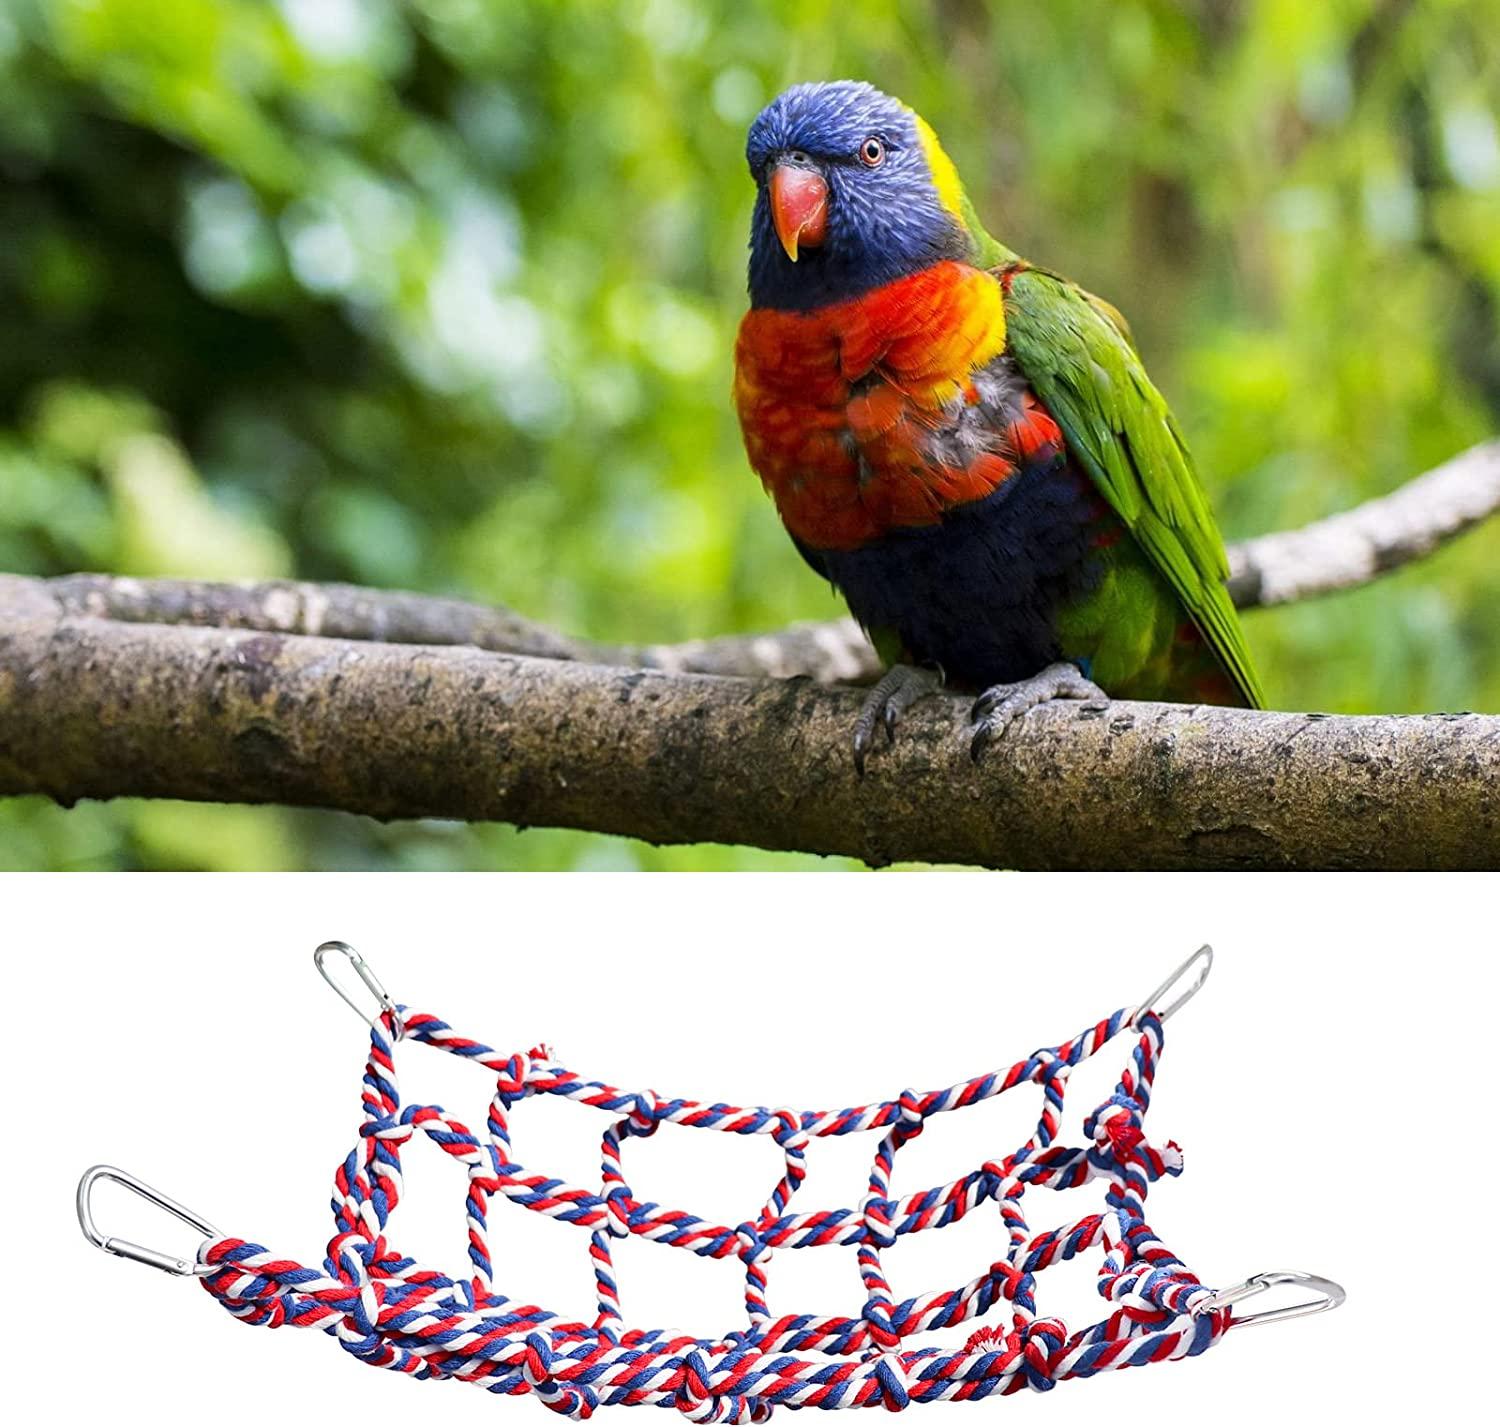 2 Pack Colorful Bird Rope Net, Rat Climbing Rope Net, Pet Hanging Hammock,  Bird Ladder Rope Bridge, Small Animal Rope Net Toy, Cage Decor Accessories  for Rat Hamster Bird Ferret Small(11 8 Inches)